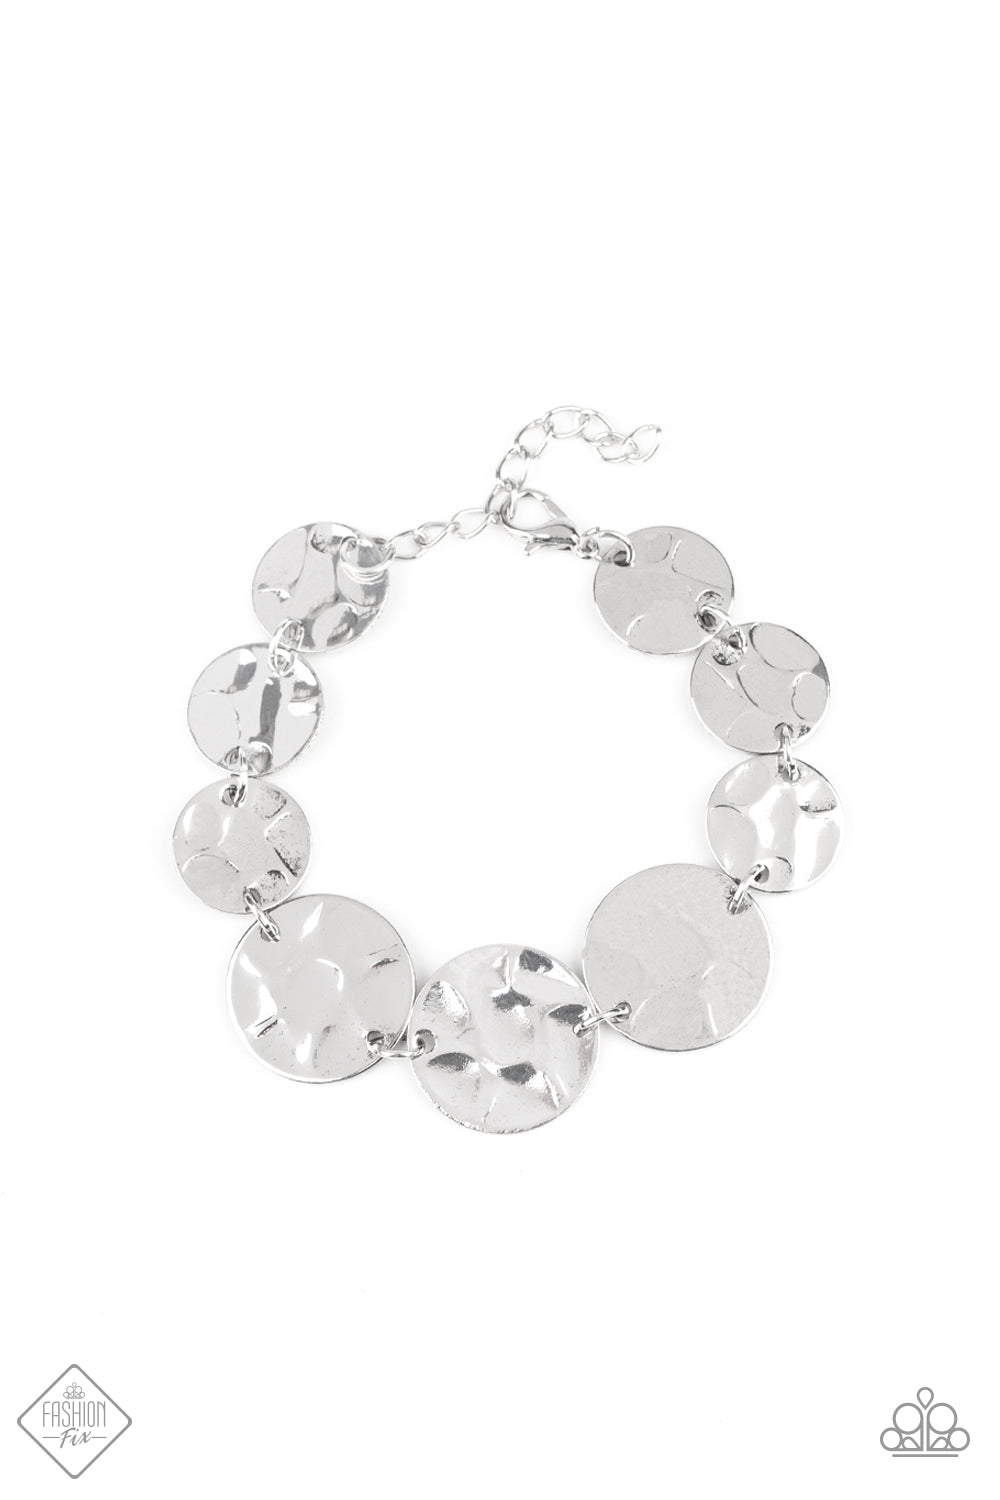 Rustic Reflections Fashion Fix Silver Bracelet January 2020 - TheMasterCollection